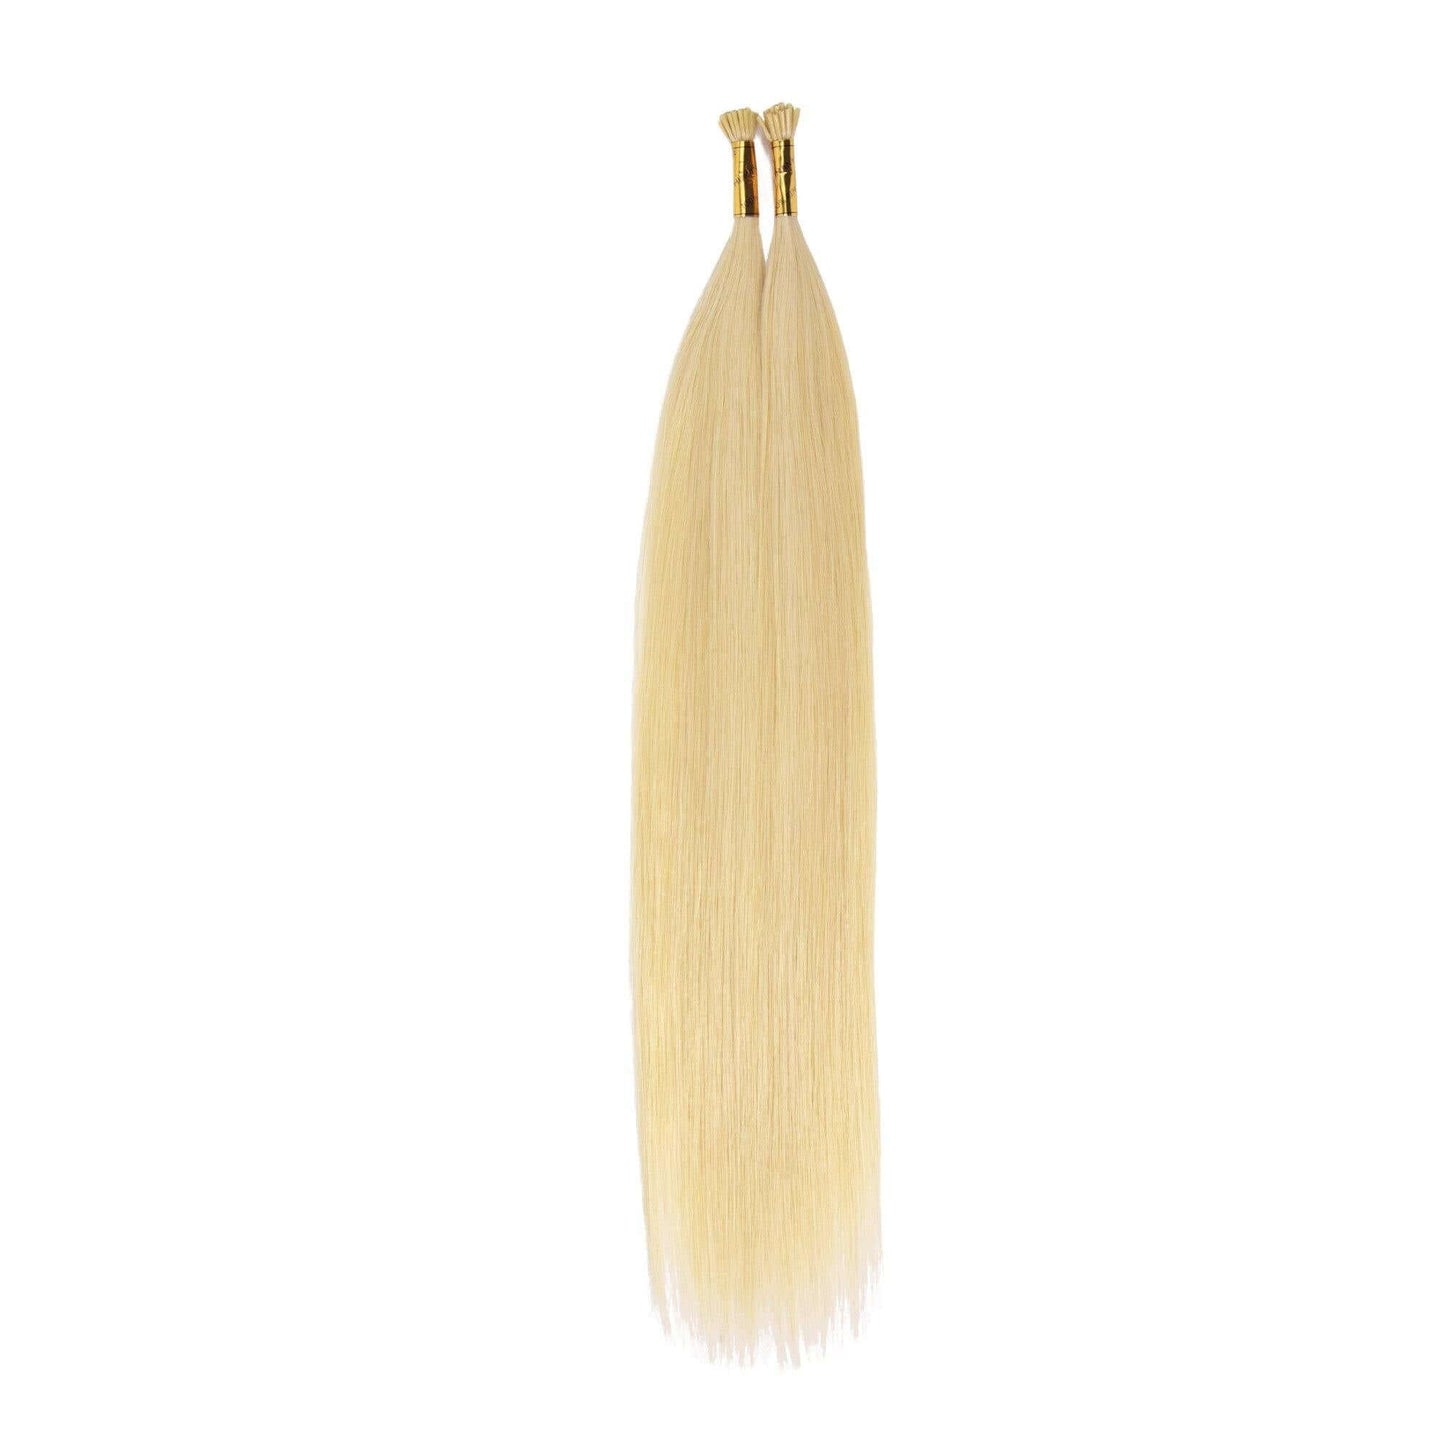 14" Bohyme Luxe - I-Tip - Silky Straight - 60pcs - BL613 - BLIS60-14-BL613